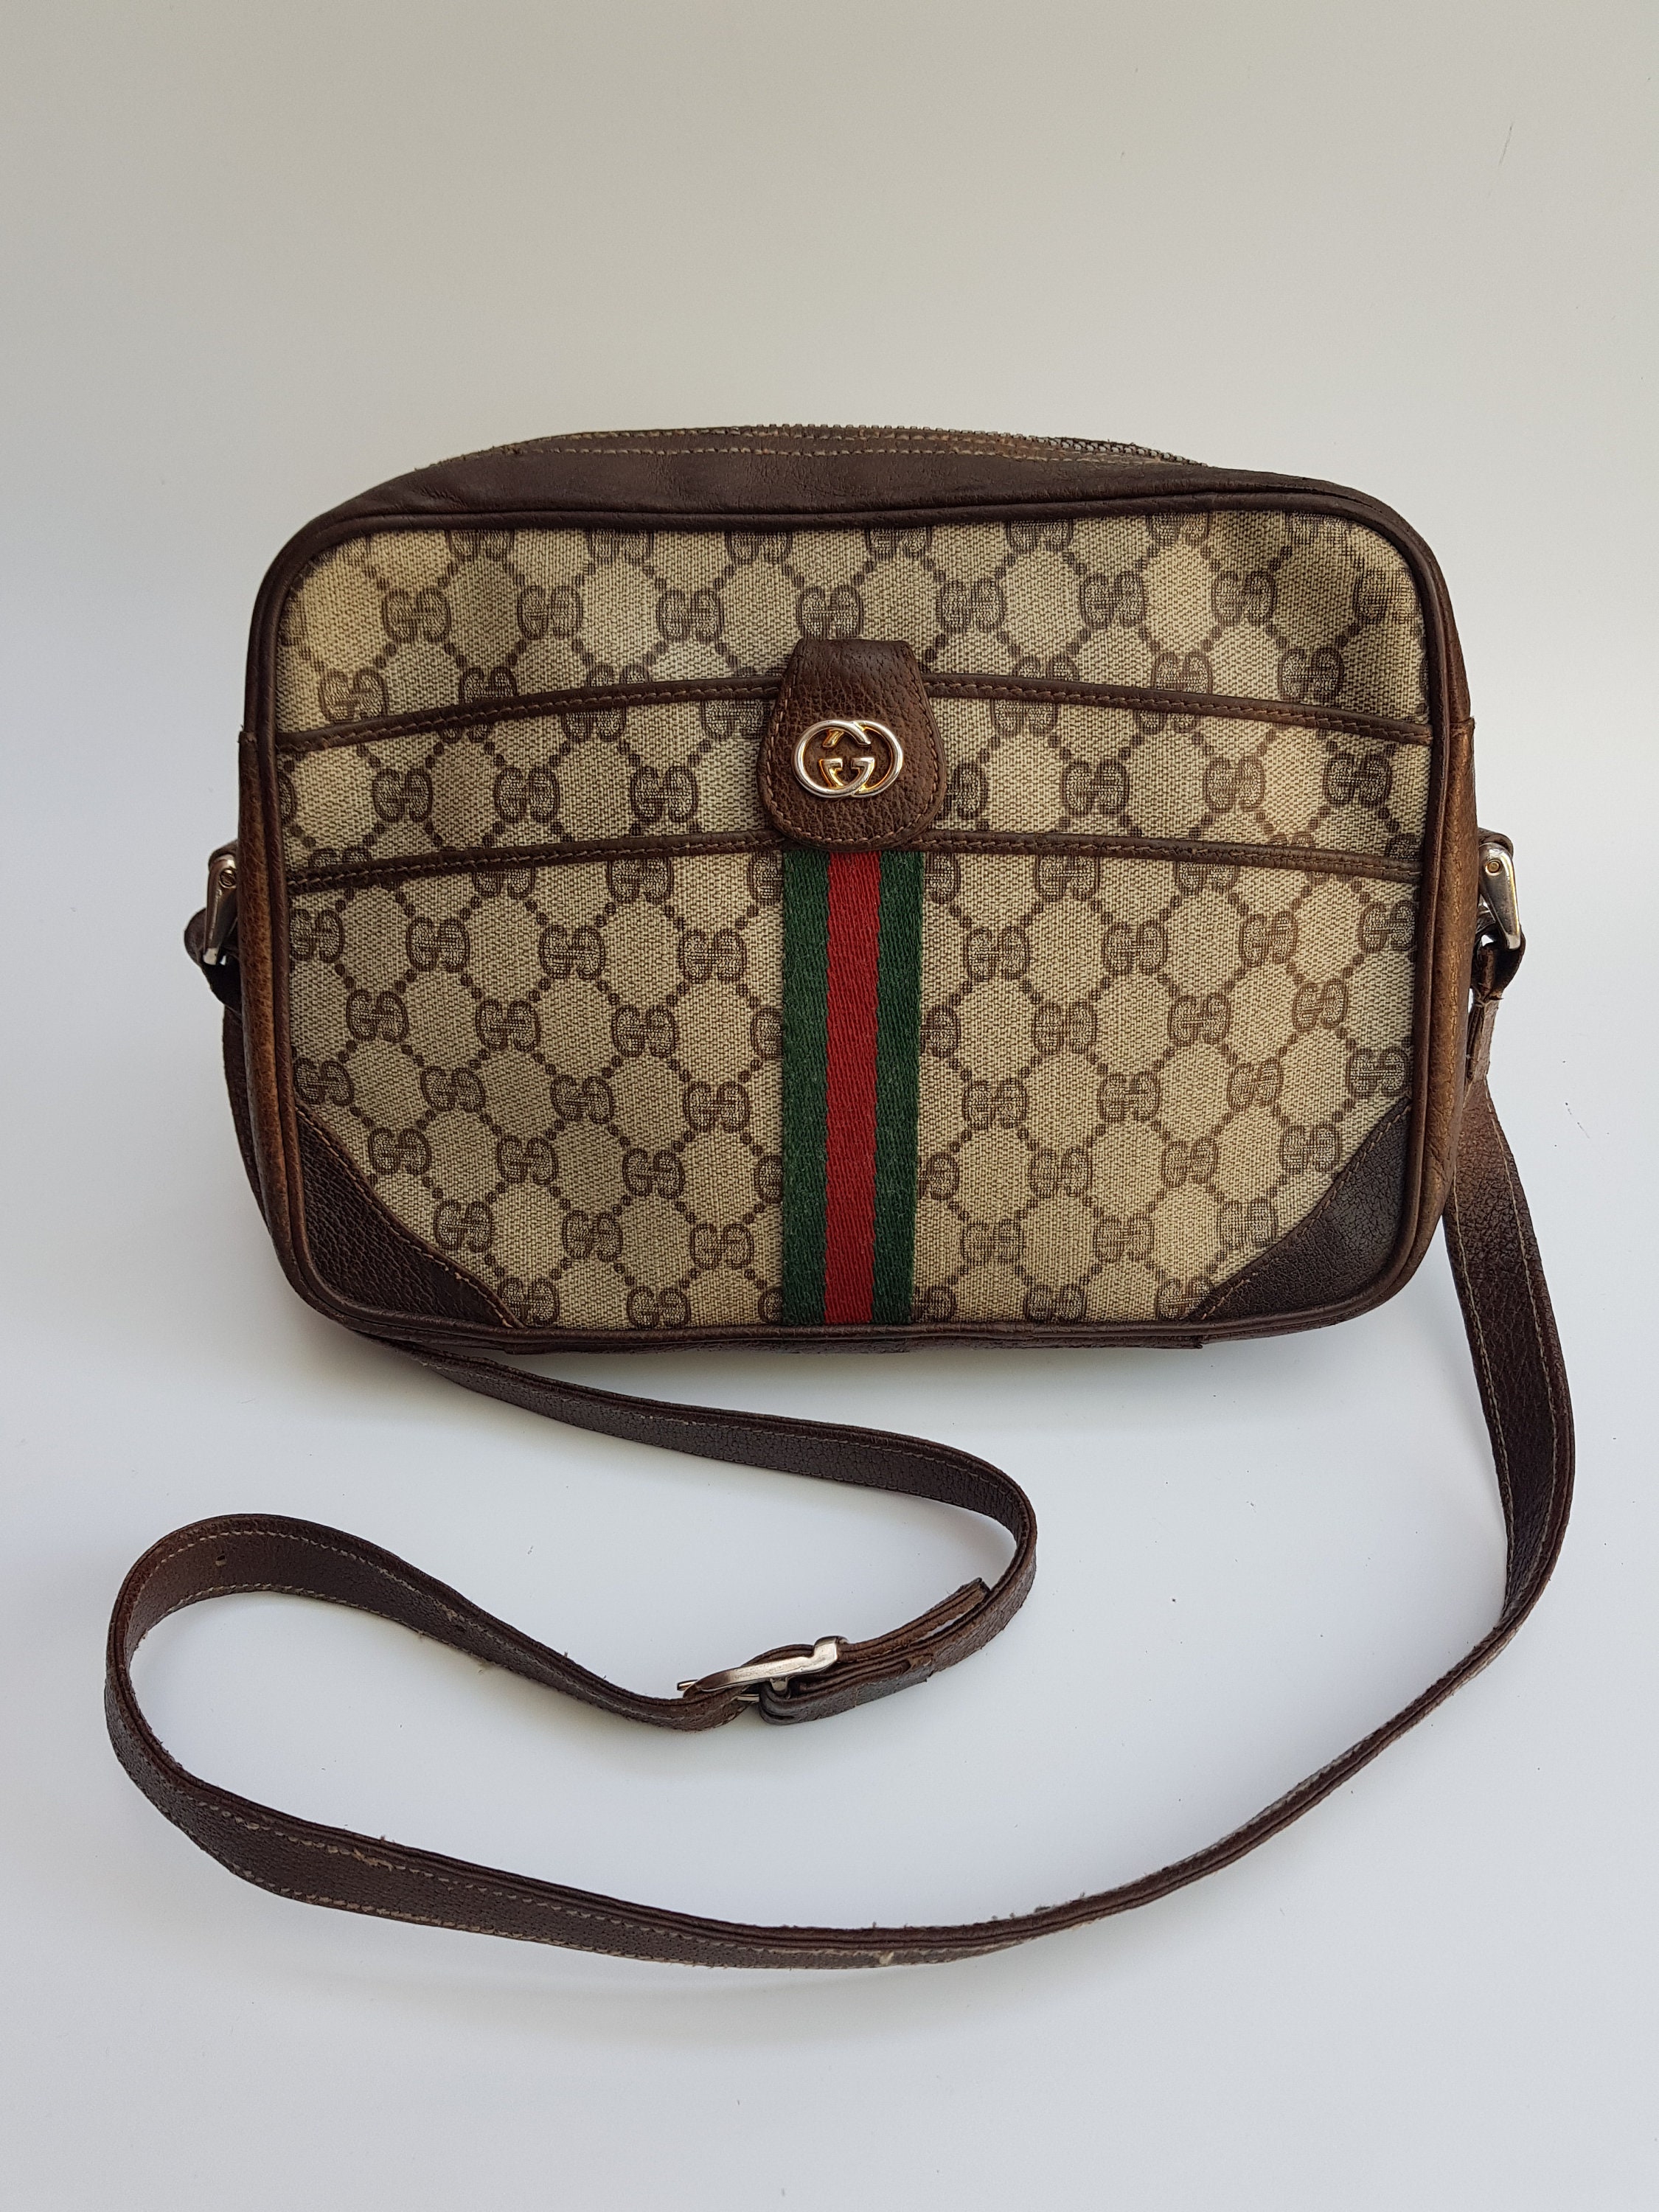 Outfit ideas - How to wear GUCCI Ophidia GG Supreme cross-body bag - WEAR